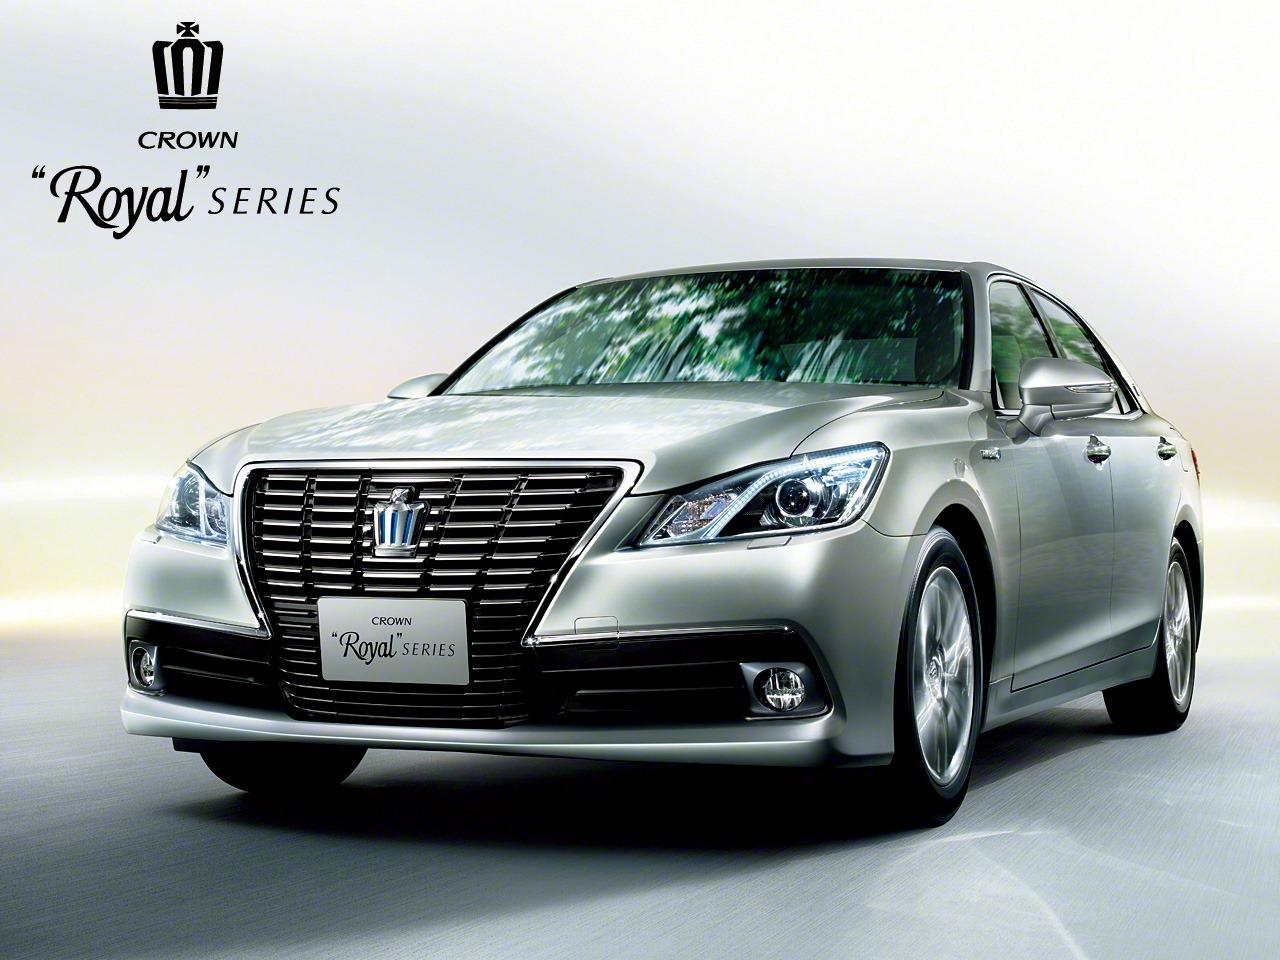 Toyota Crown 2013 photo 90362 picture at high resolution